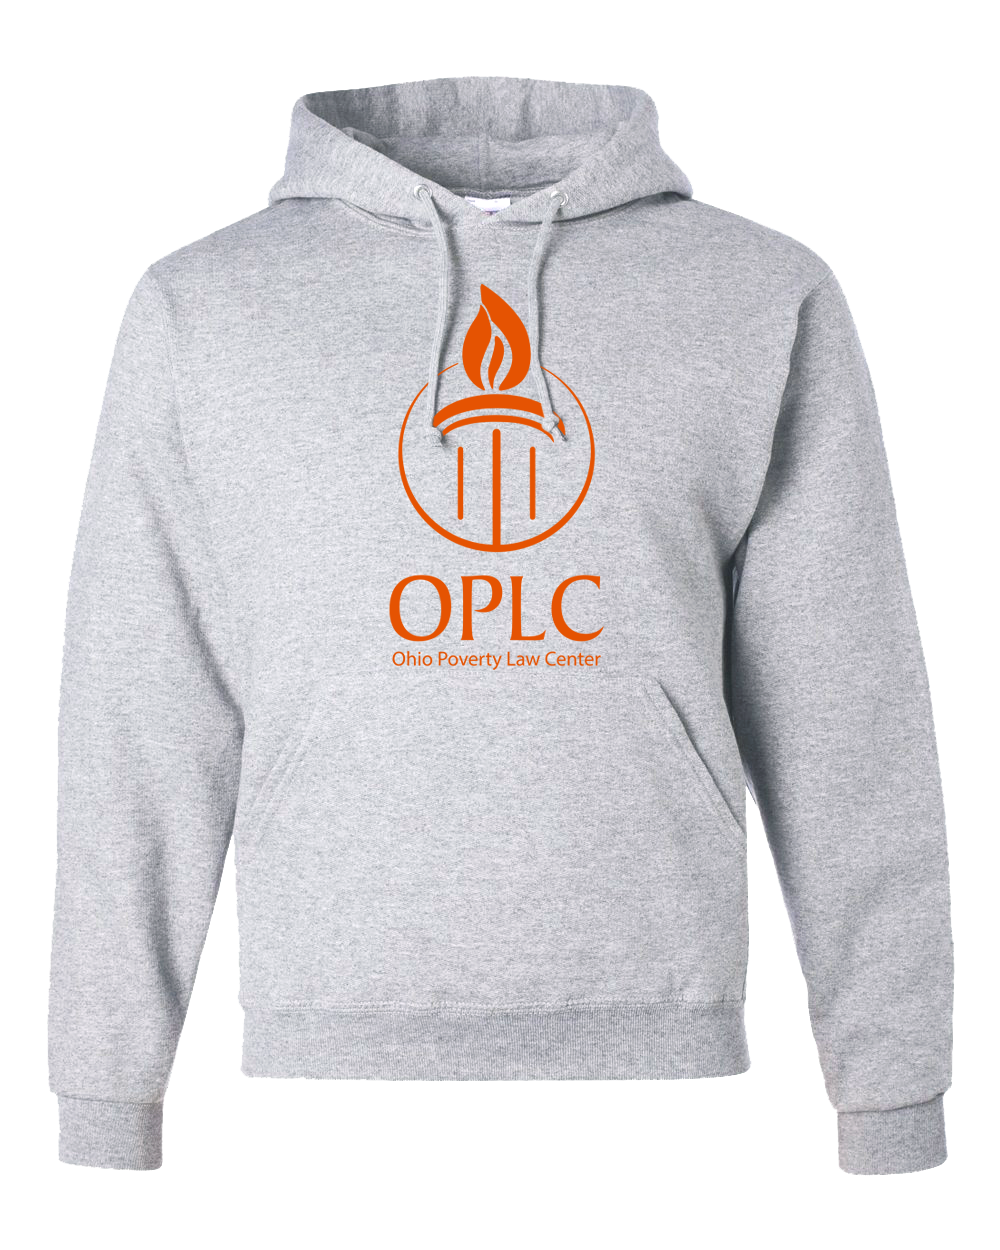 OPLC - Ohio Poverty Law Center Hoodie